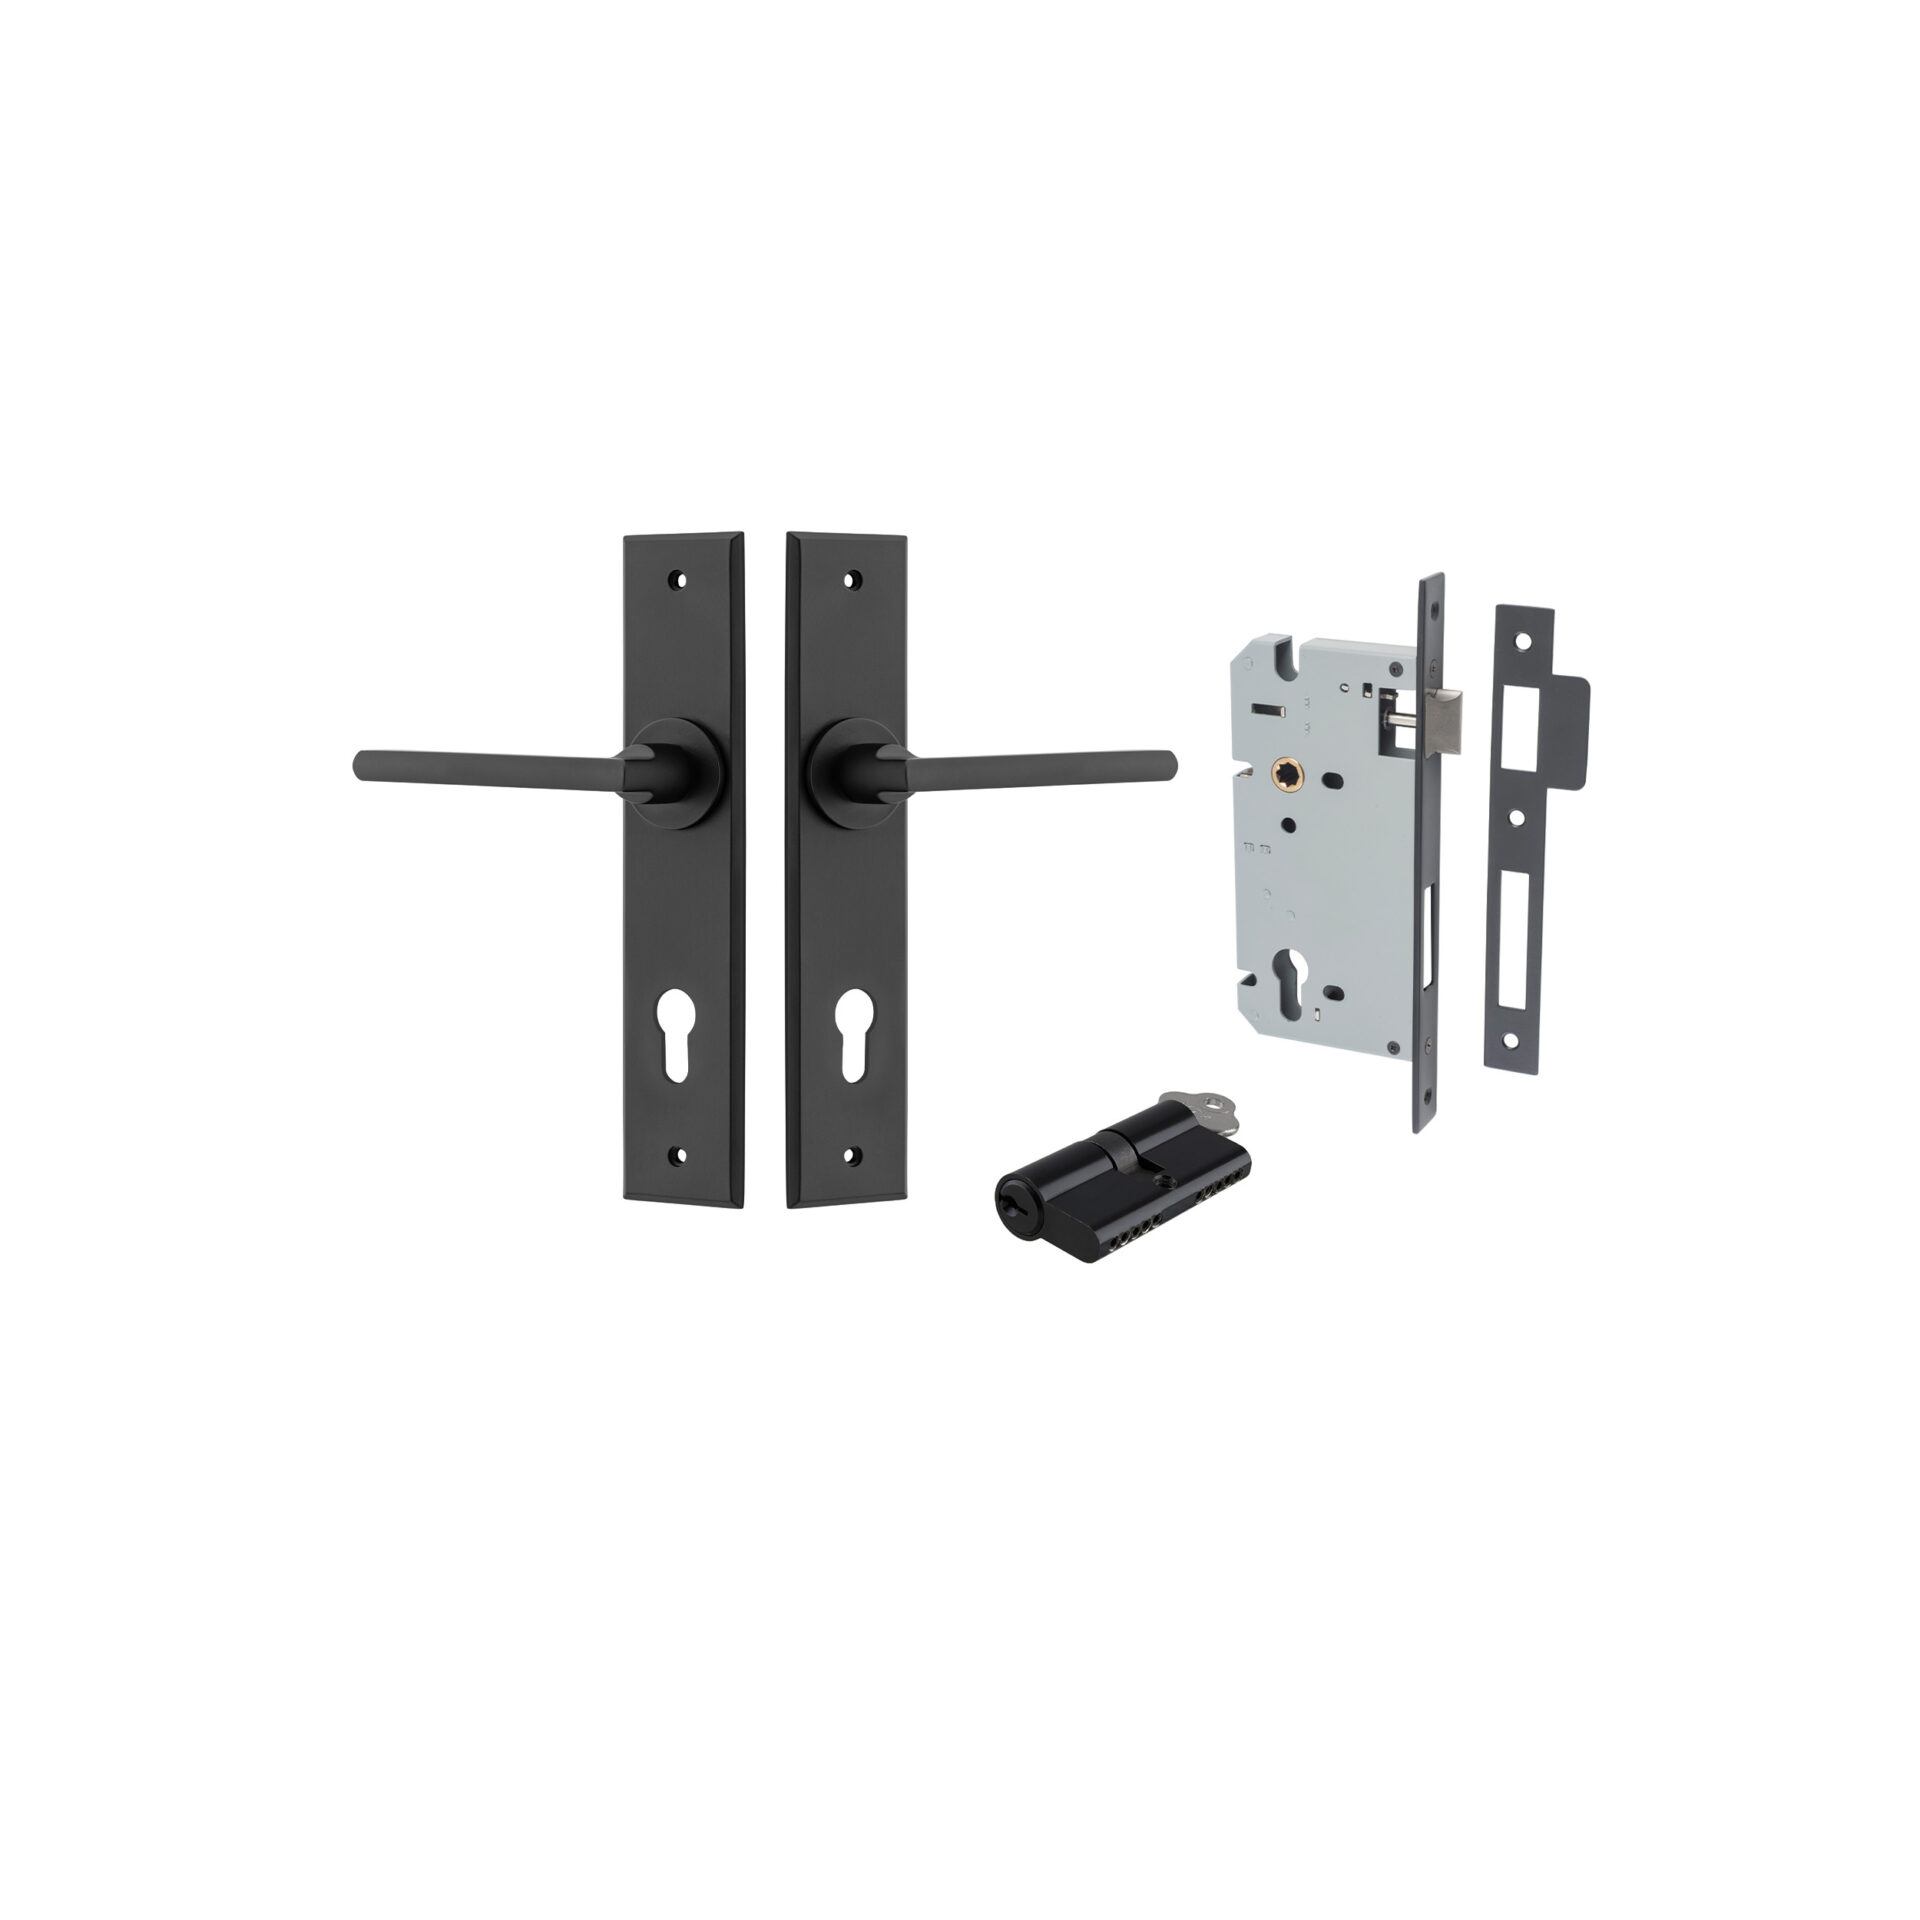 Baltimore Lever - Chamfered Backplate Entrance Kit with High Security Lock